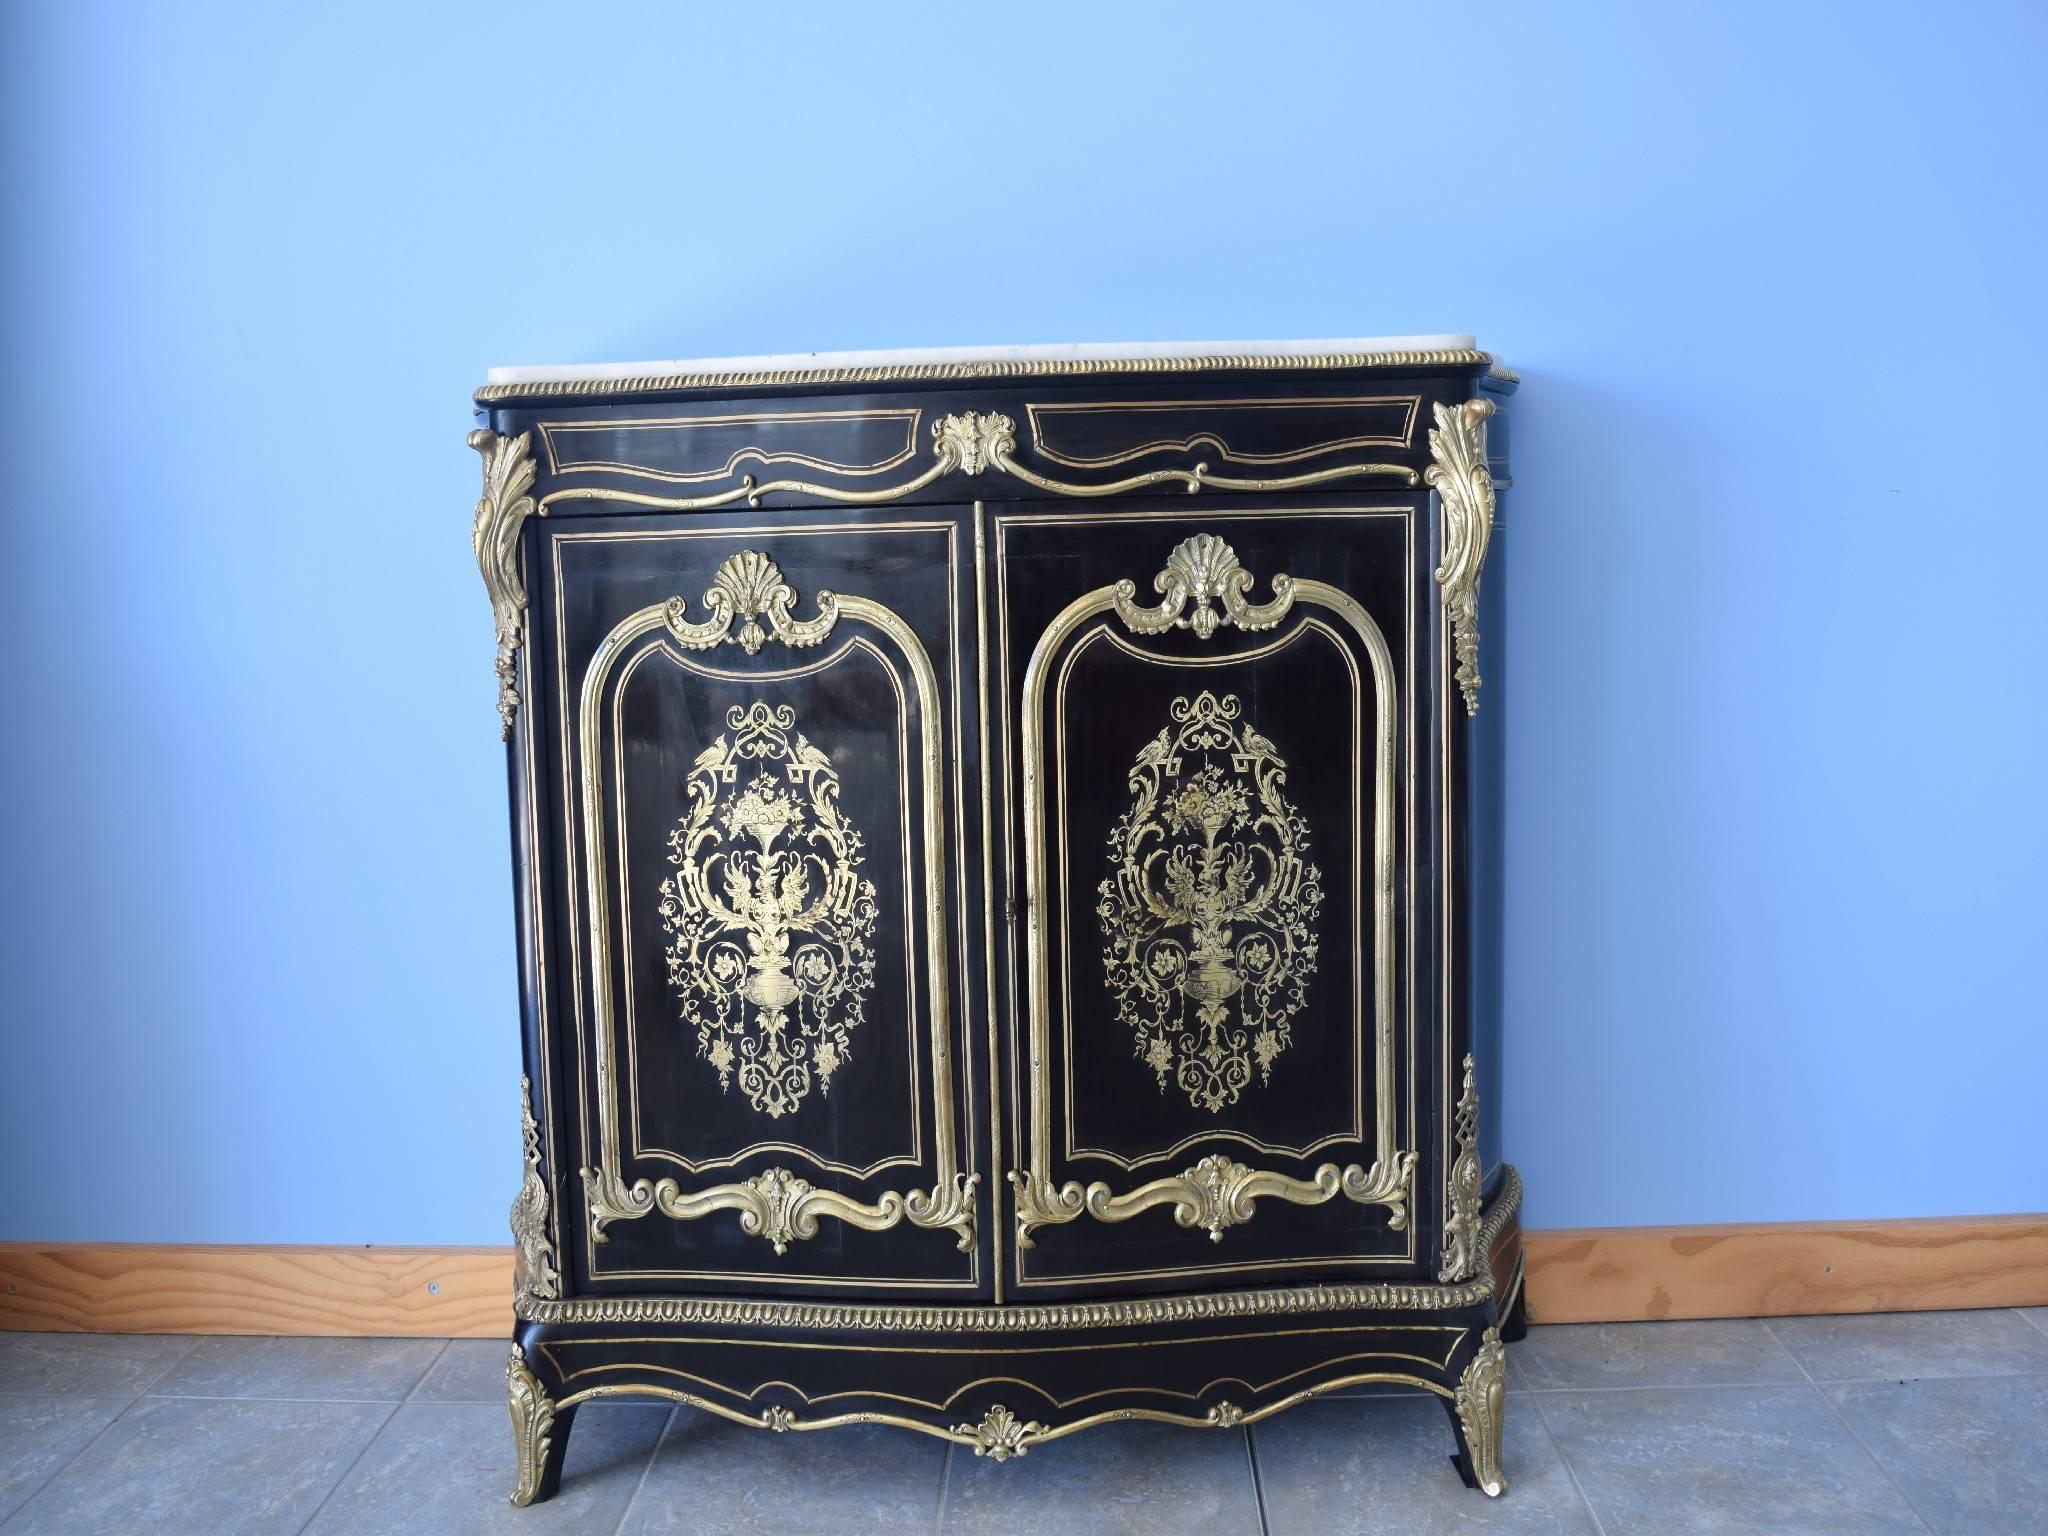 Large French cabinet, Napoleon III Boulle style with magnificent ornaments, white marble oakwood painted black with bronze and gilt ornaments. 

This large French cabinet dates, circa 1870-1880.

Size length 130 cm, depth 40 cm, height 110 cm.